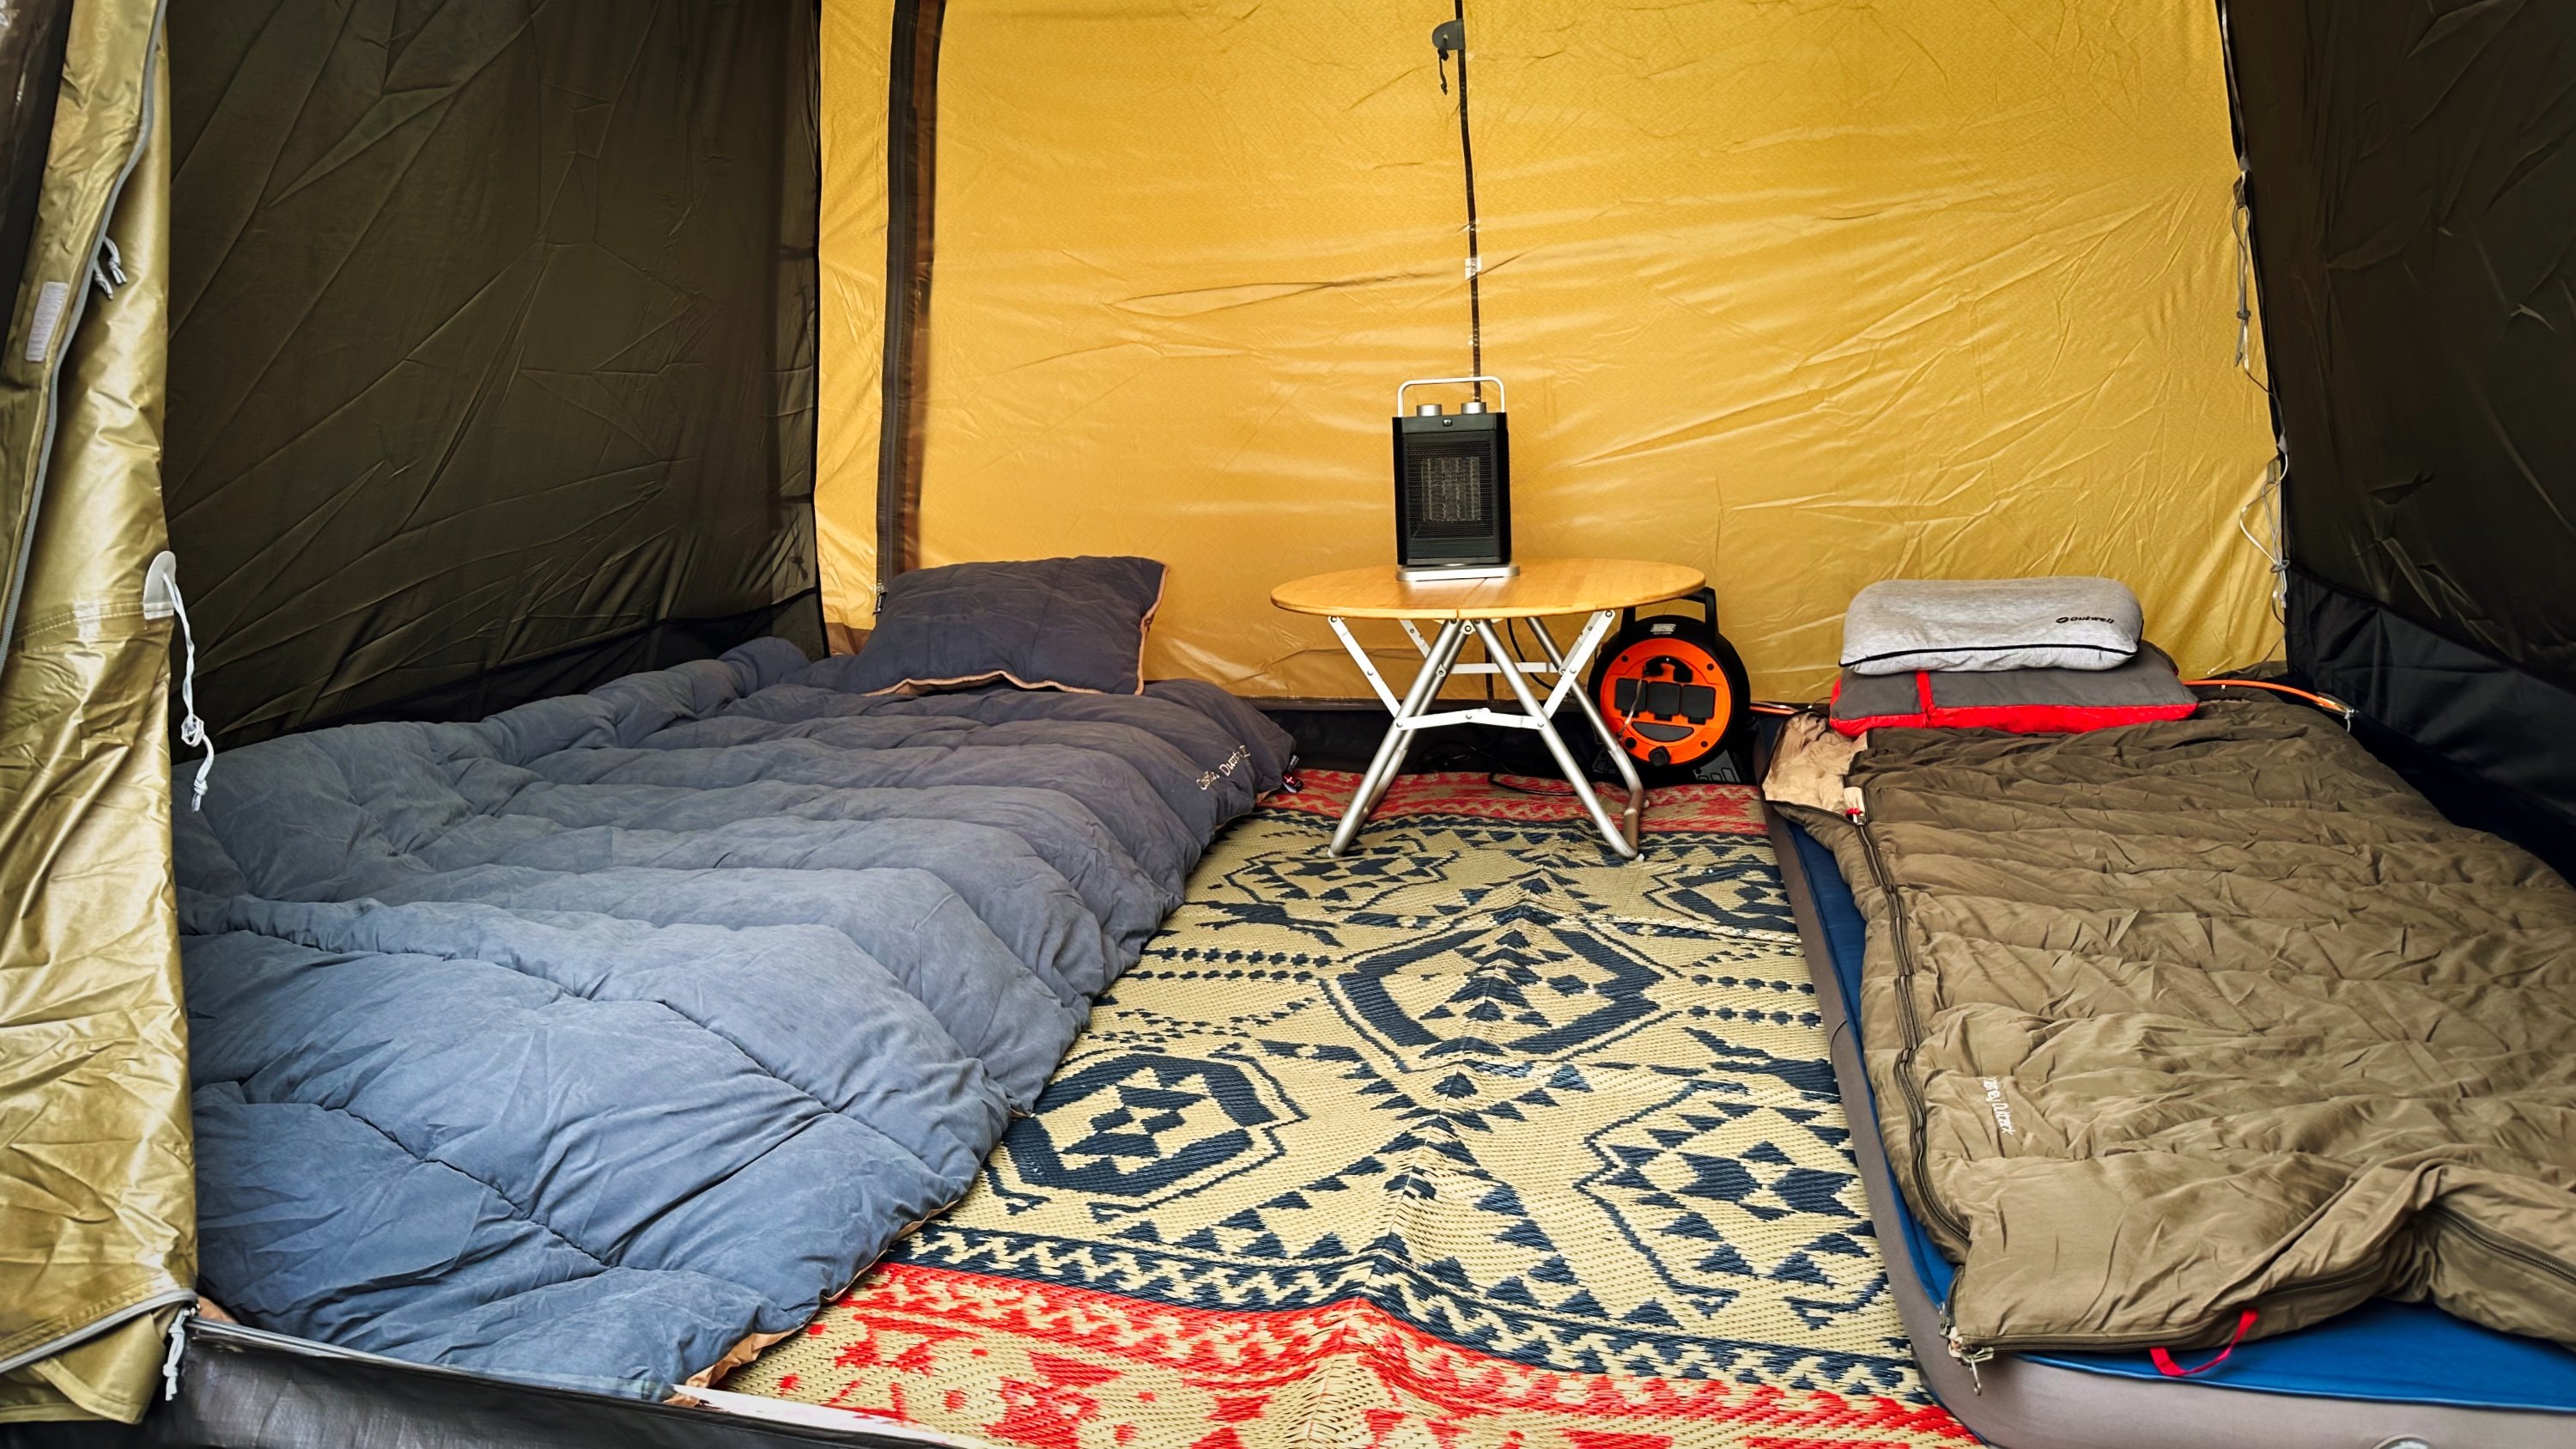 Inside the tent with sleeping bags and carpet set-up